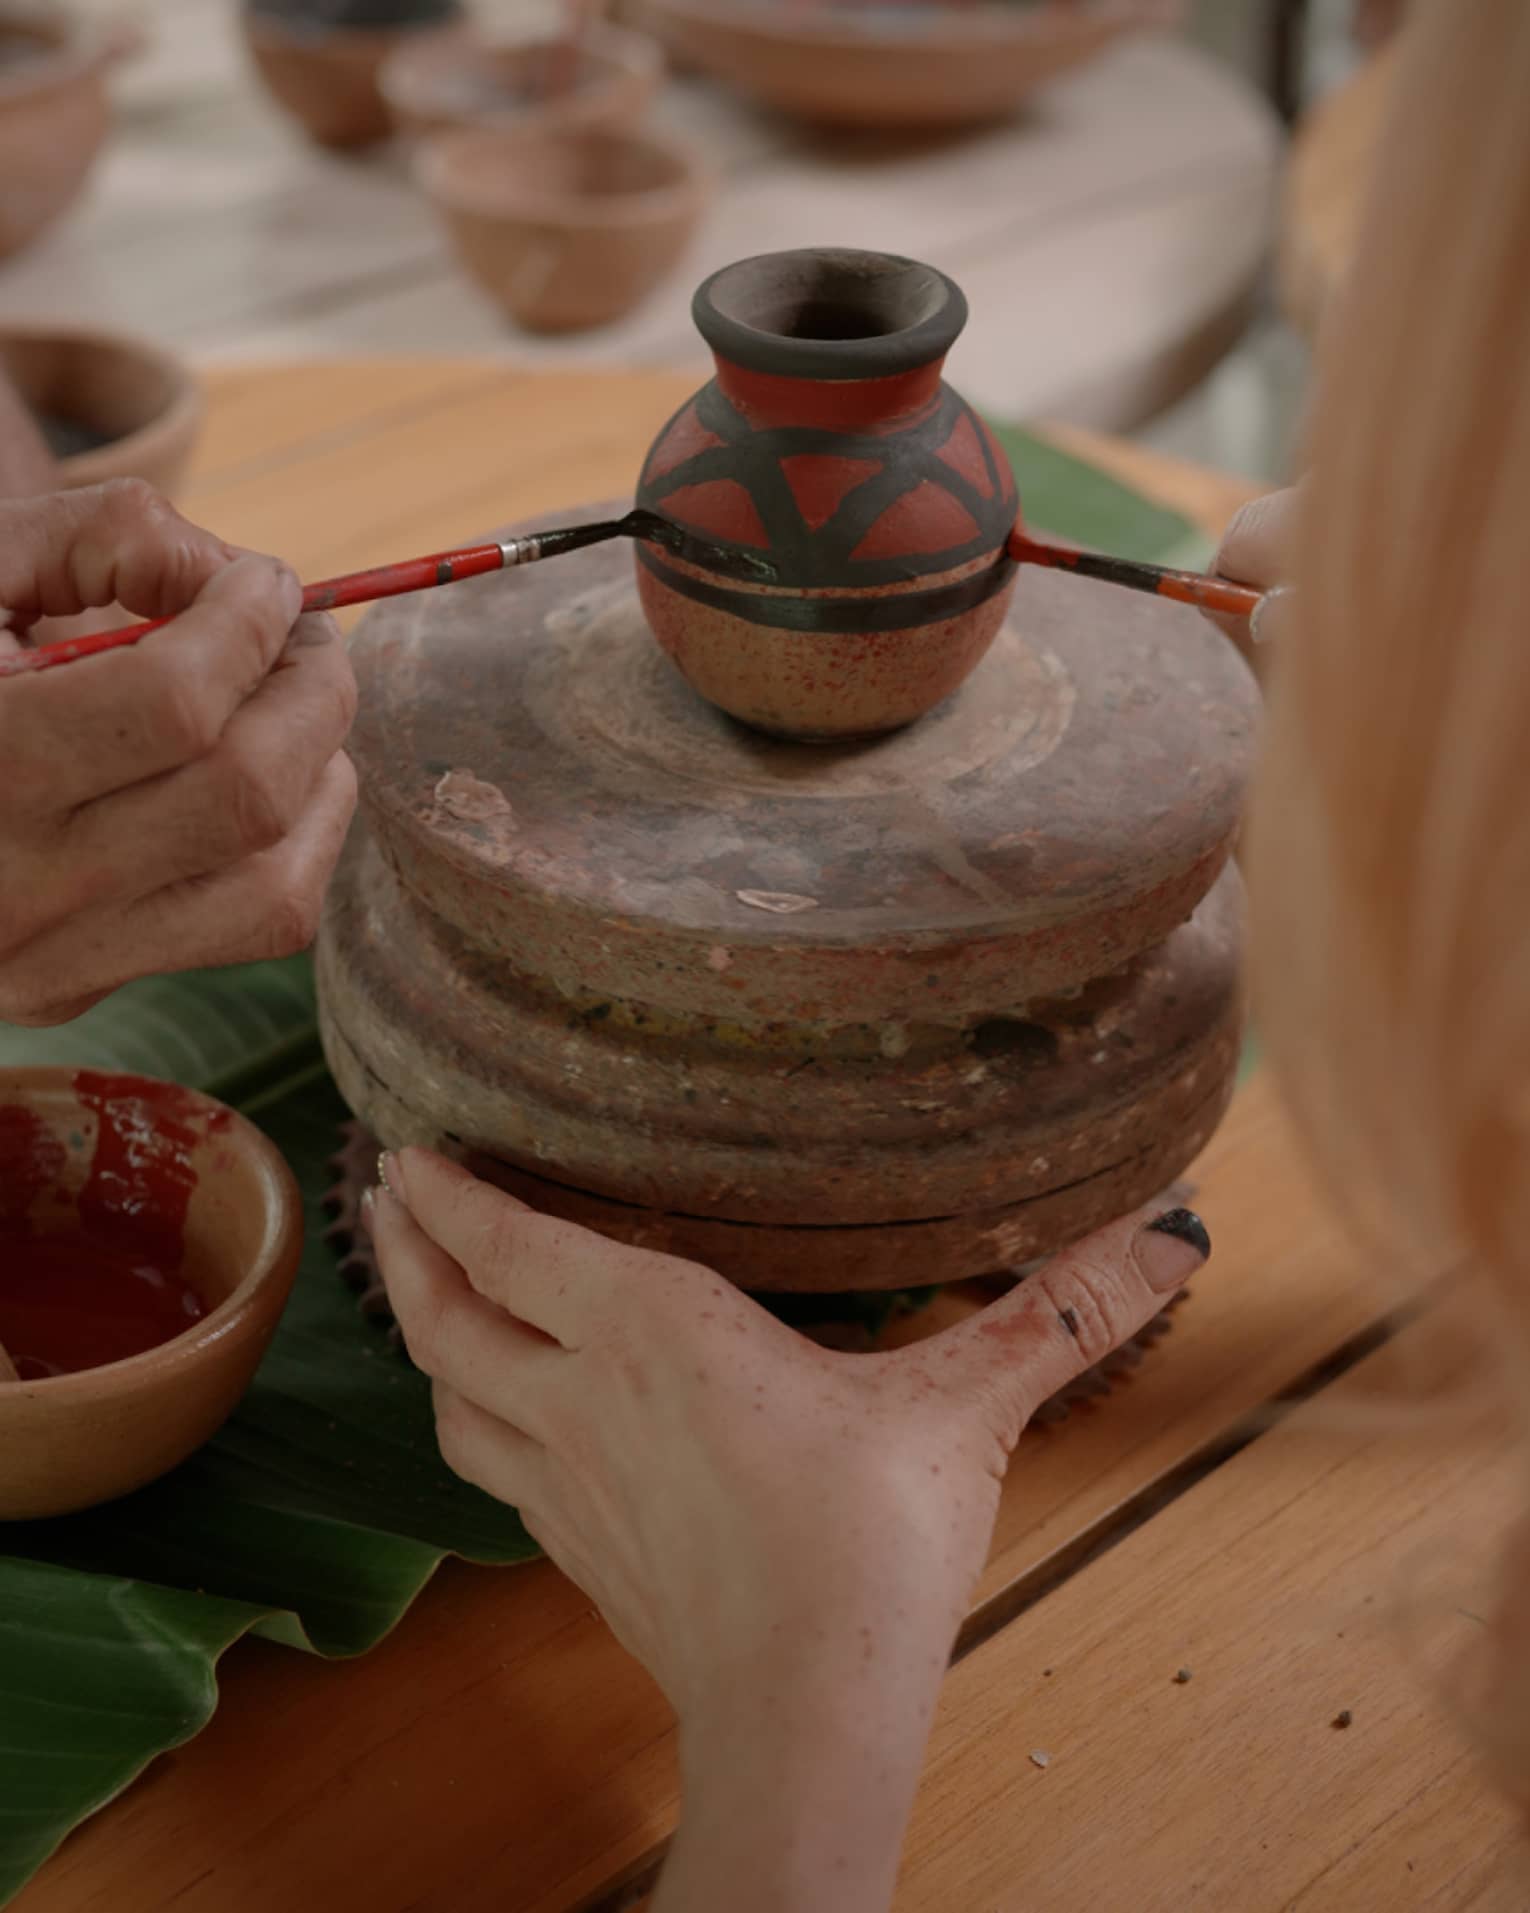 Two sets of hands using thin paintbrushes to decorate a small ceramic vase on a pottery wheel amid pots of paint and pigment.